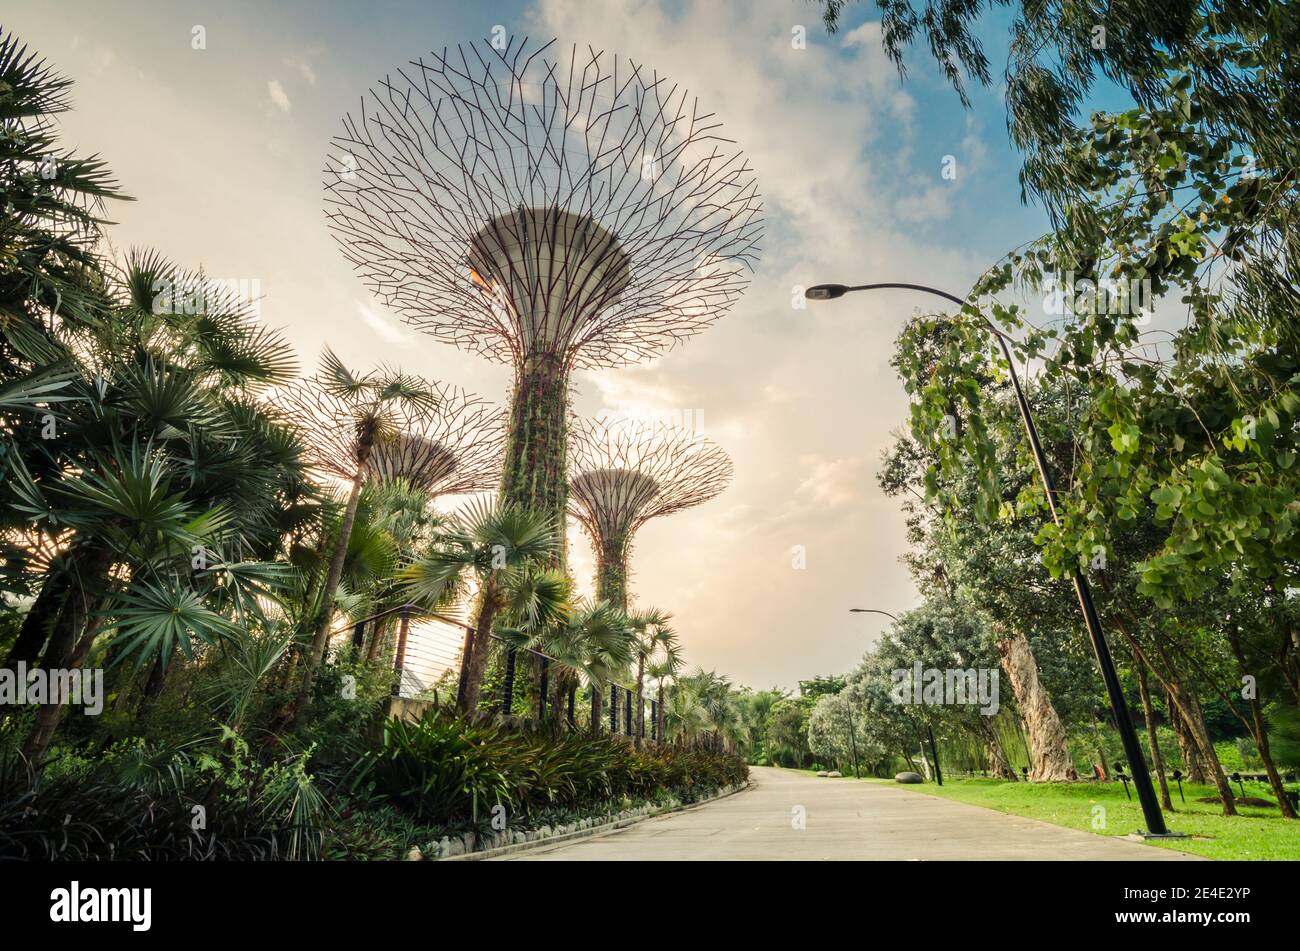 Super trees at Gardens by the Bay. The tree-like structures are fitted with environmental technologies that mimic the ecological function of trees. Stock Photo